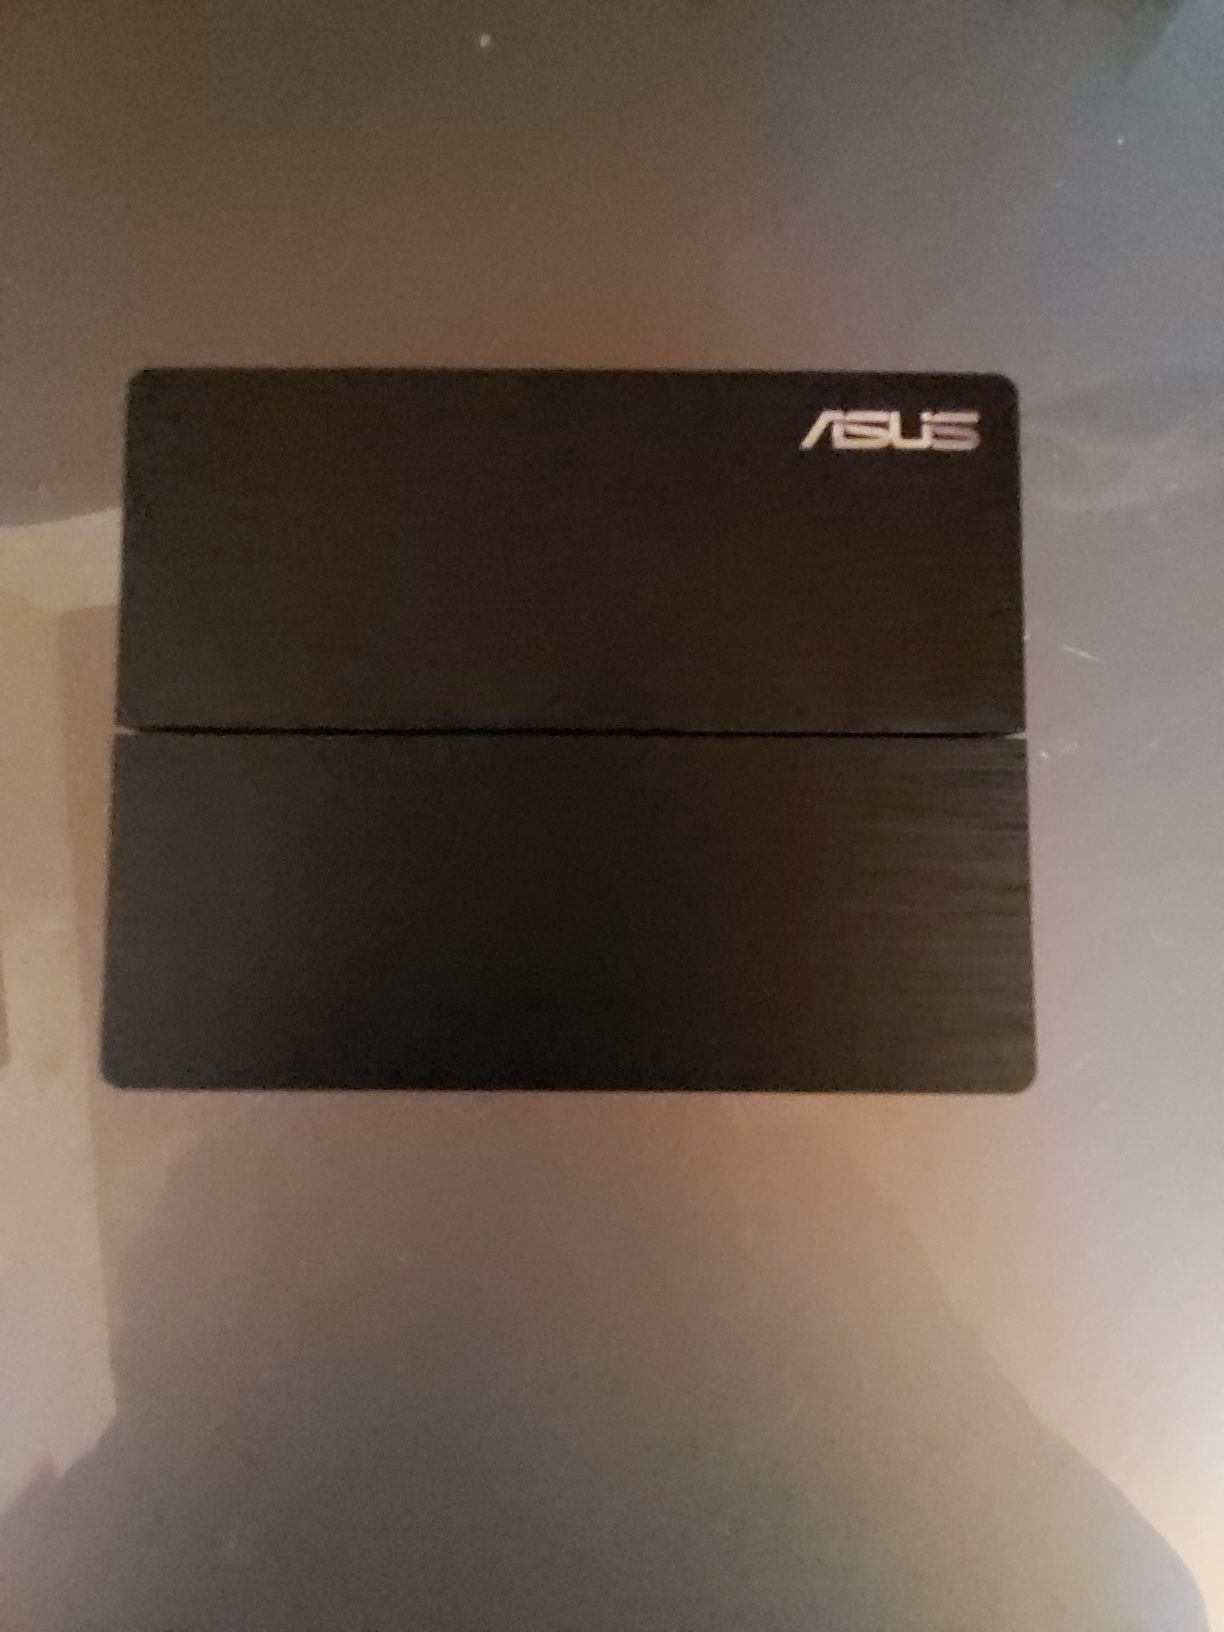 Connect Dock Asus